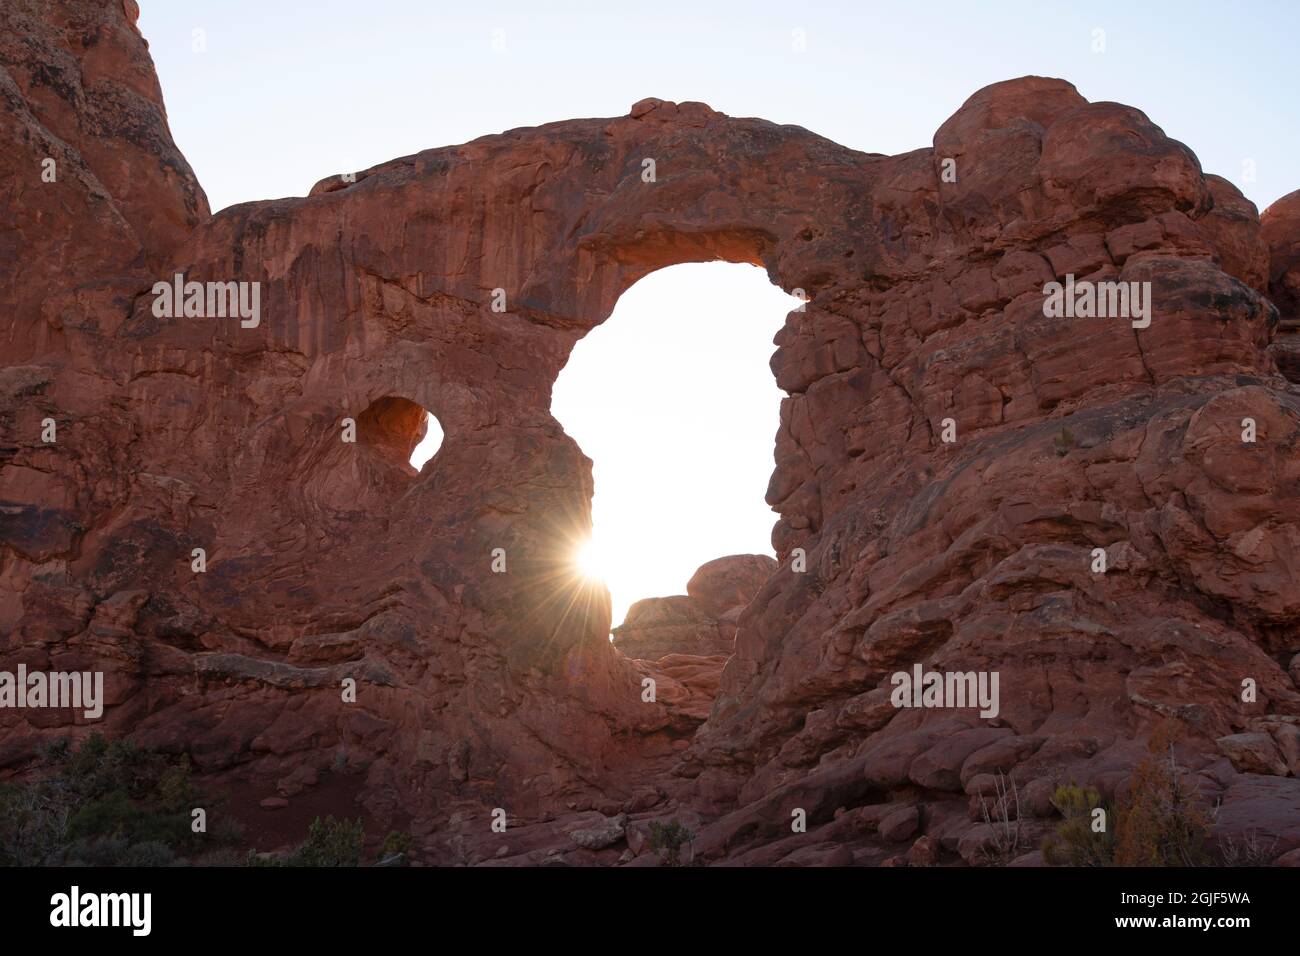 Turret Arch, Arches National Park, Moab, Utah, USA Stock Photo